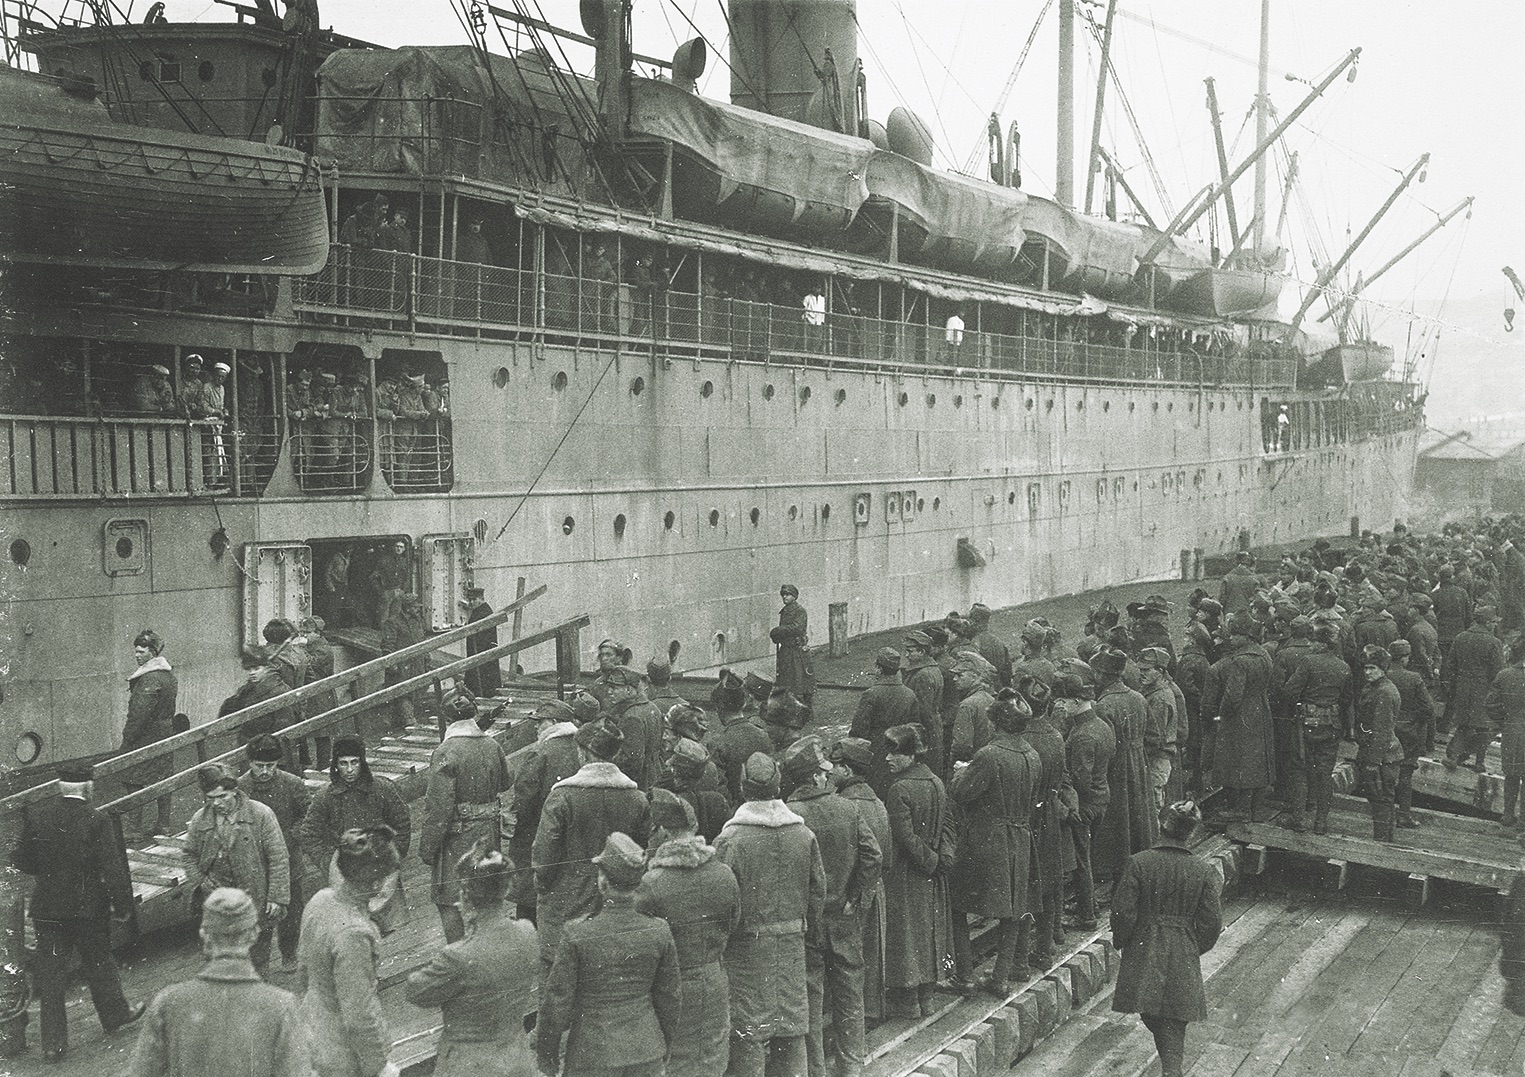 American troops disembark from the transport that carried them to Russia. (National Archives)